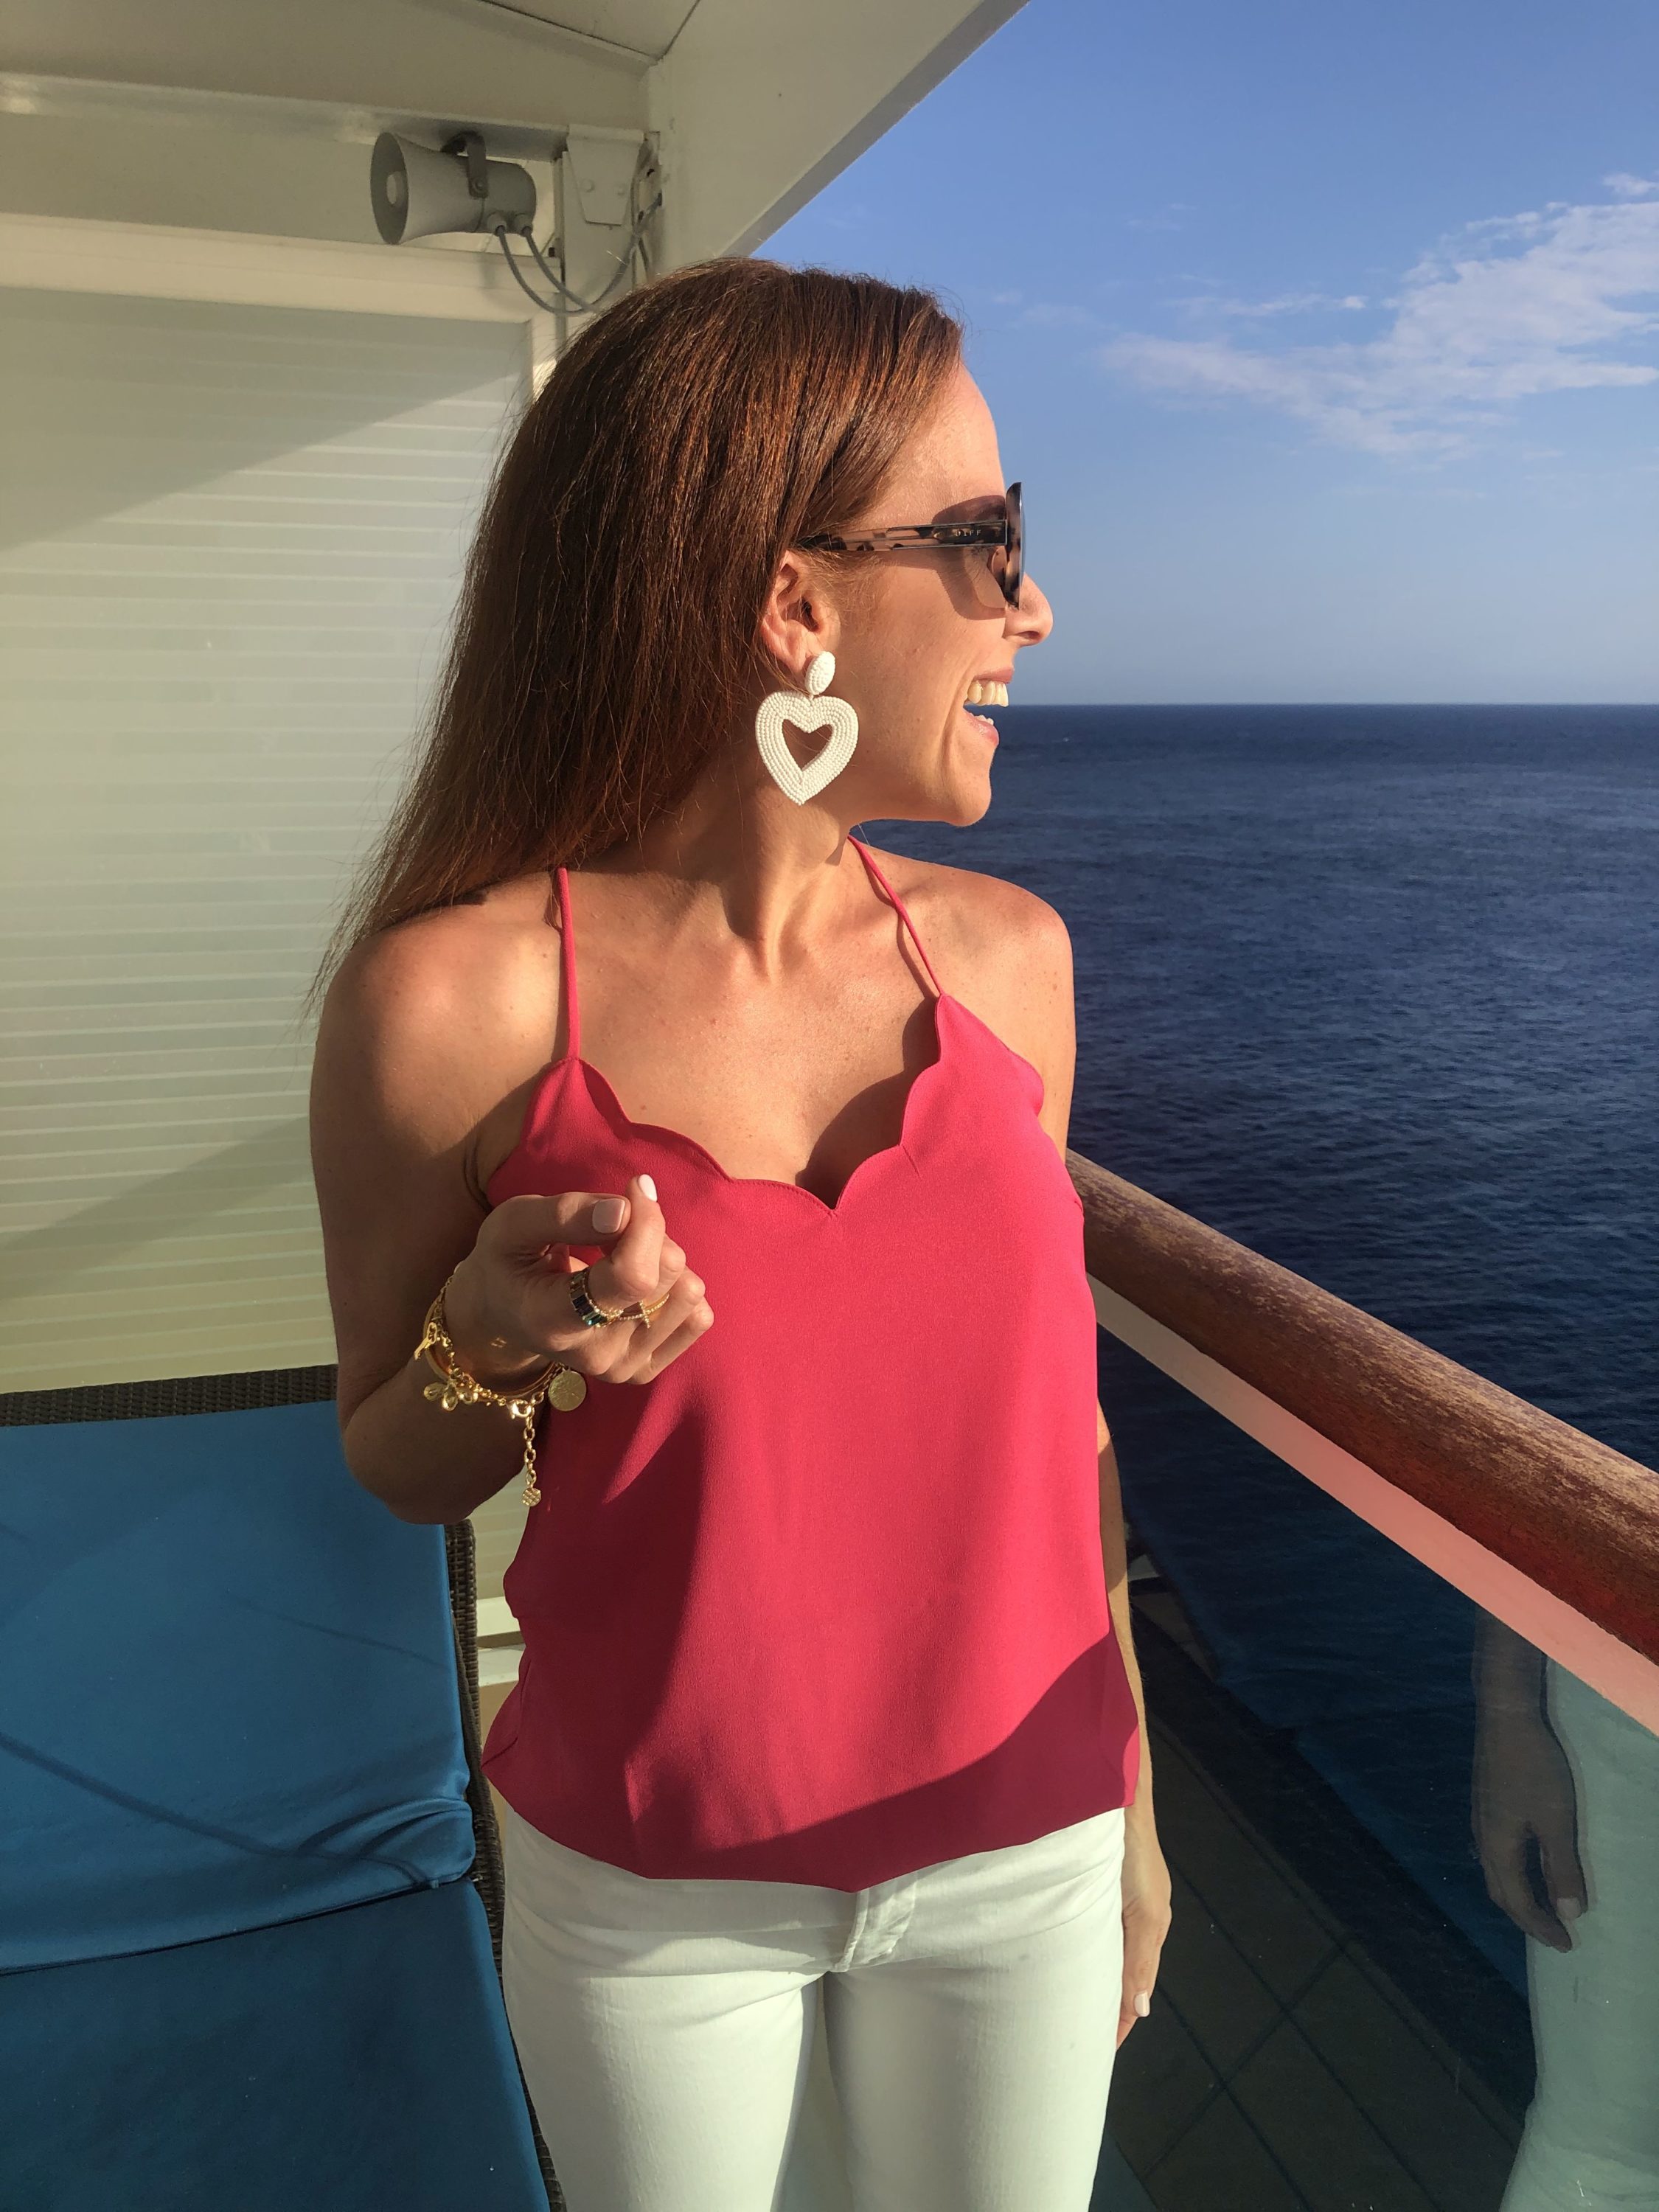 Scalloped tank and heart earrings // what to wear on a cruise